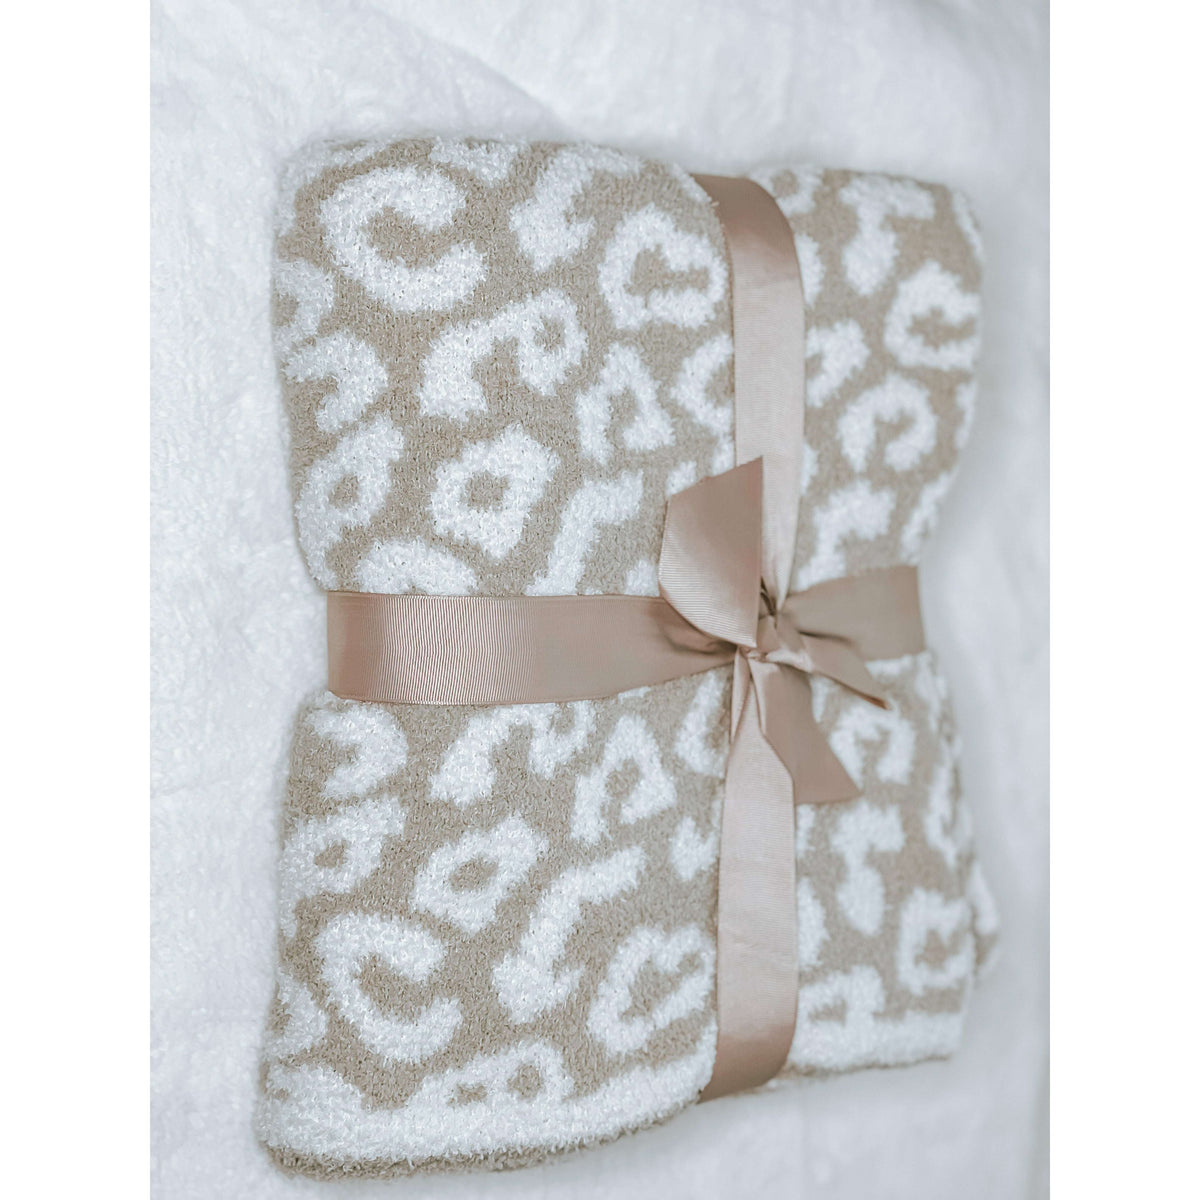 Heavenly Leopard Blanket - The Hive by Chris Jesselle